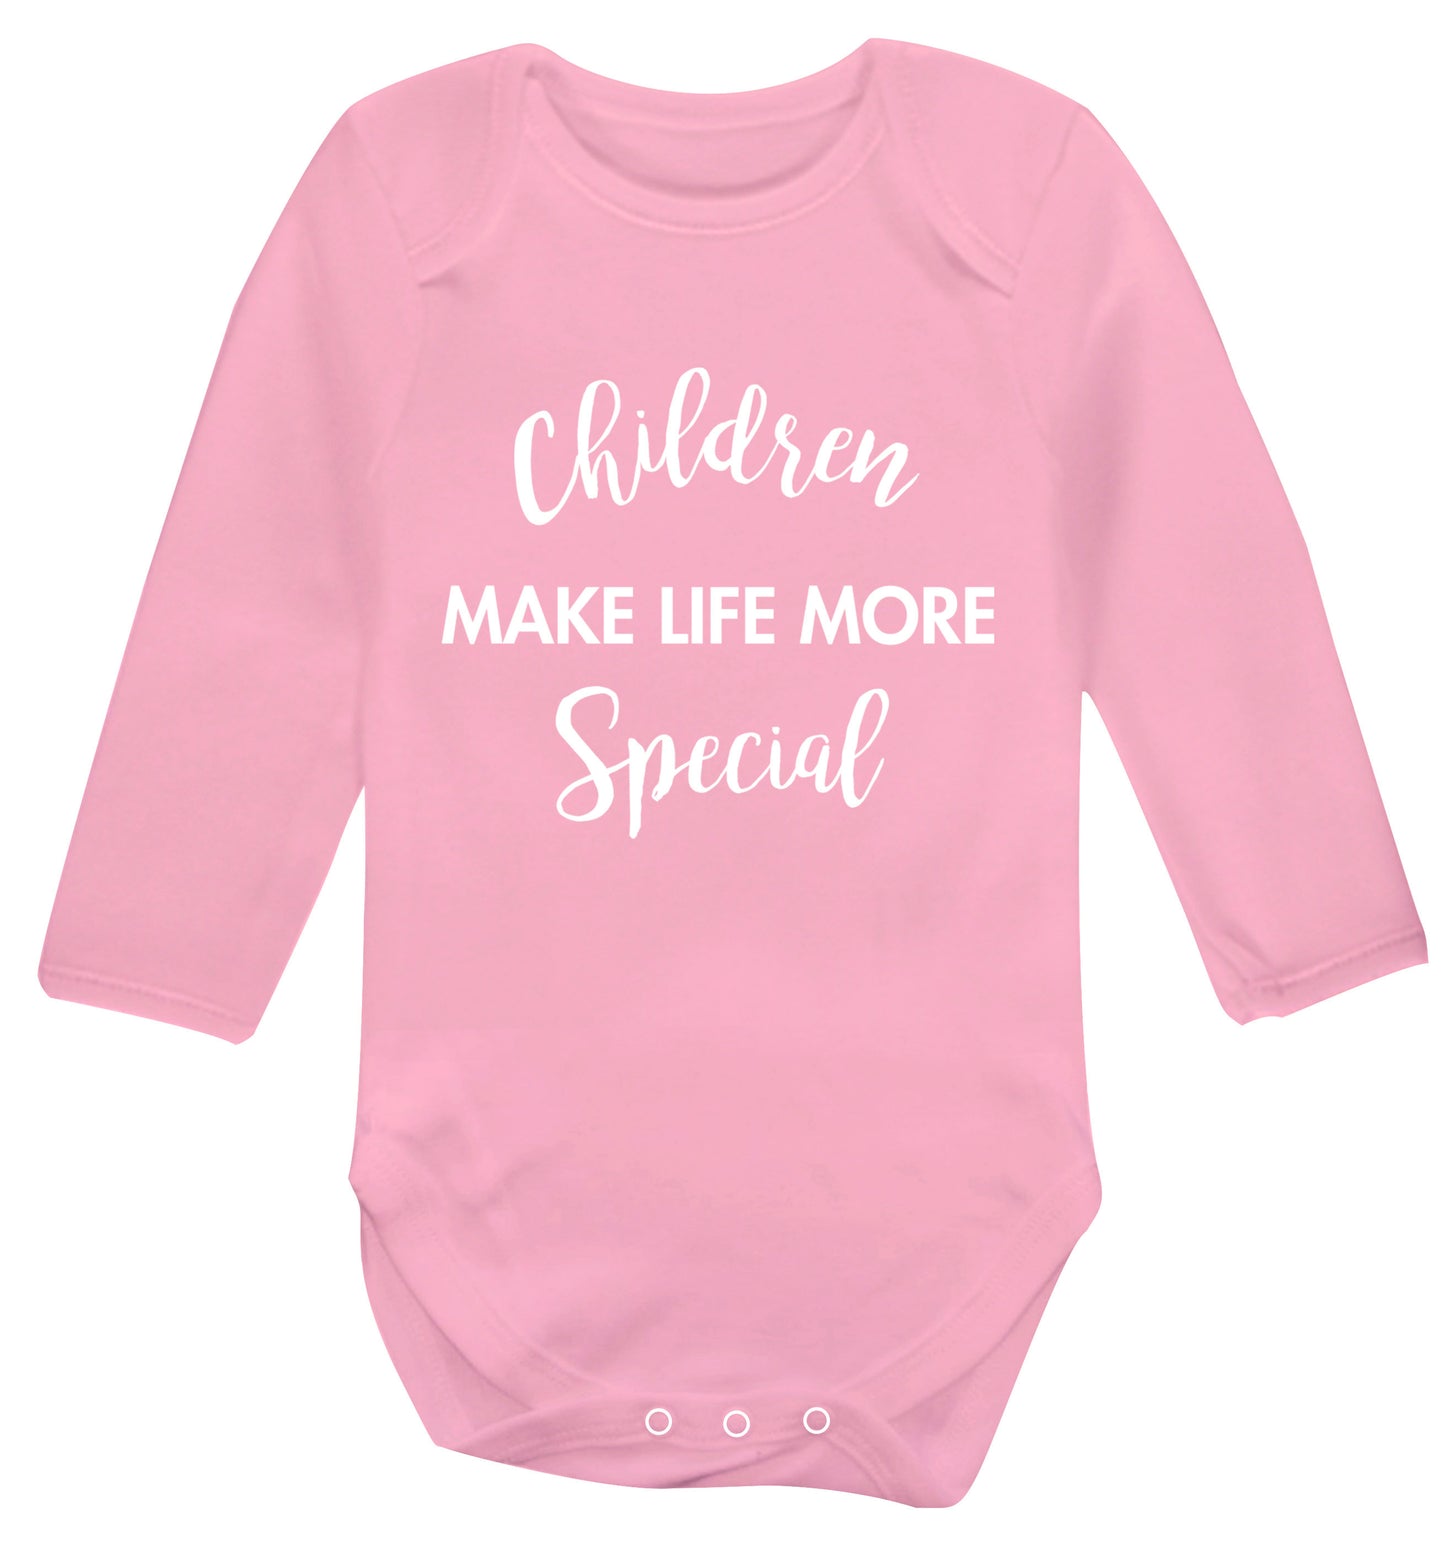 Children make life more special Baby Vest long sleeved pale pink 6-12 months